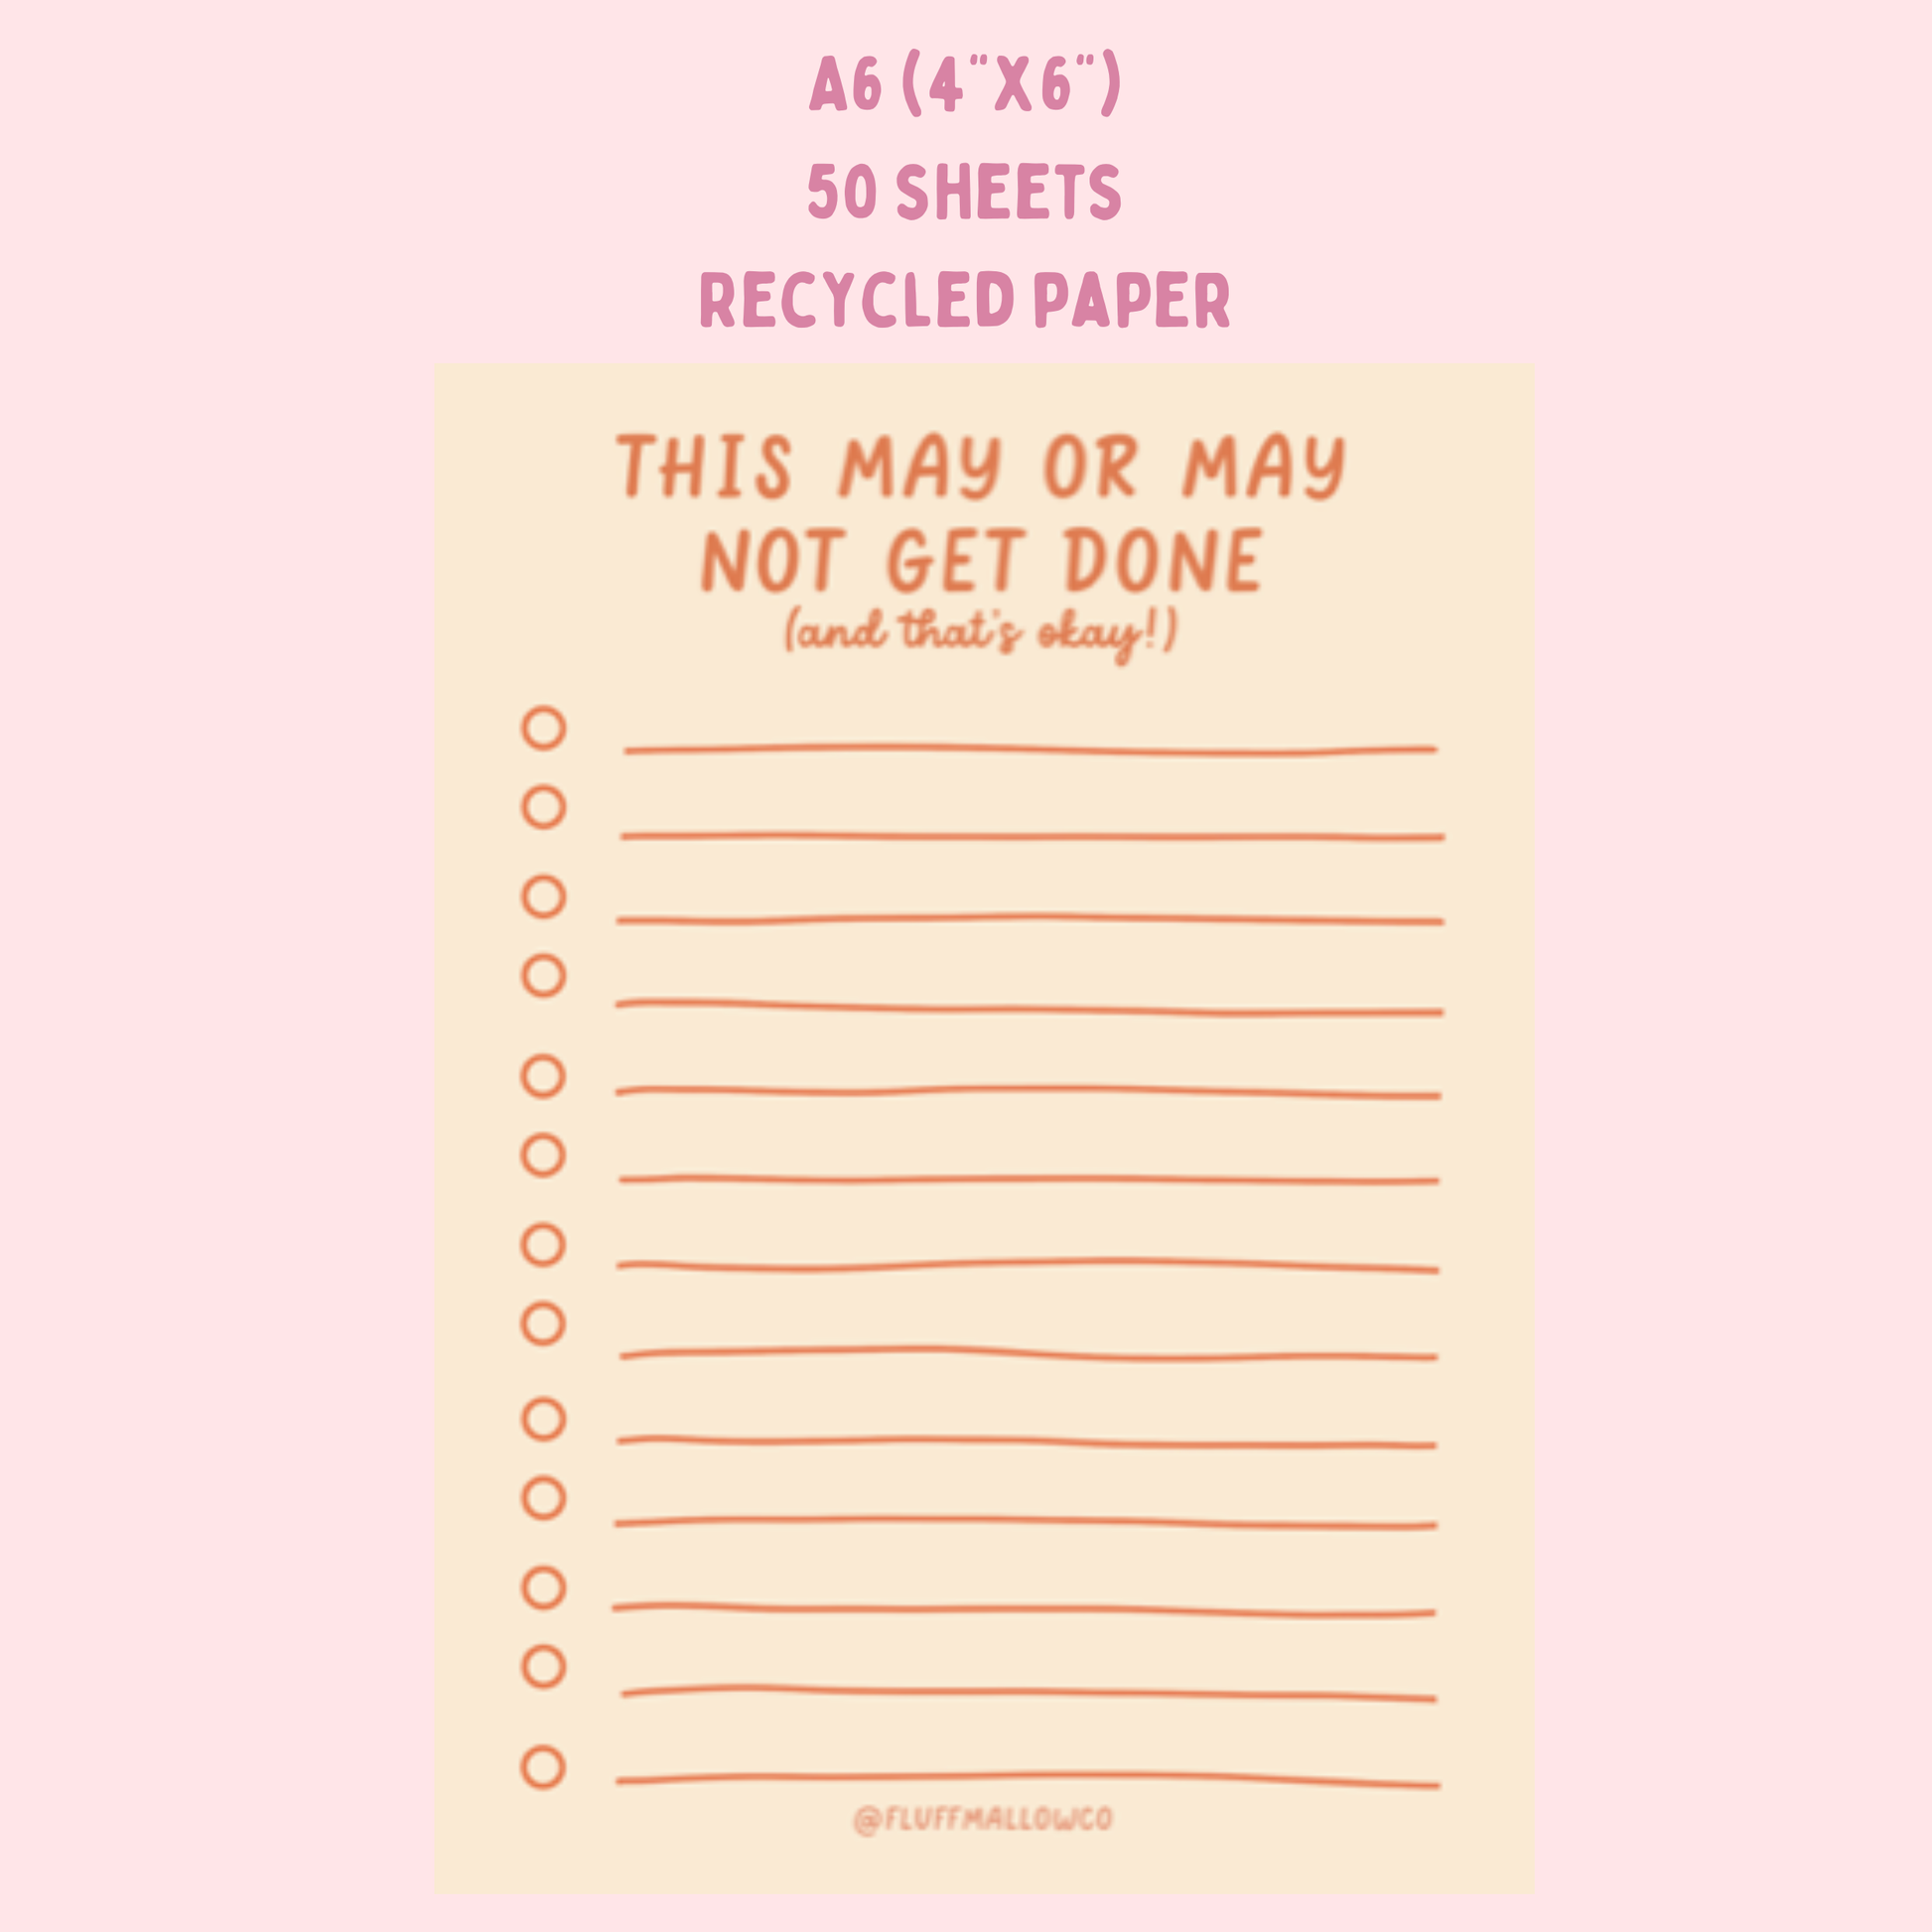 This may or may not get done mindfulness notepad (4"x6") Home Goods Fluffmallow   